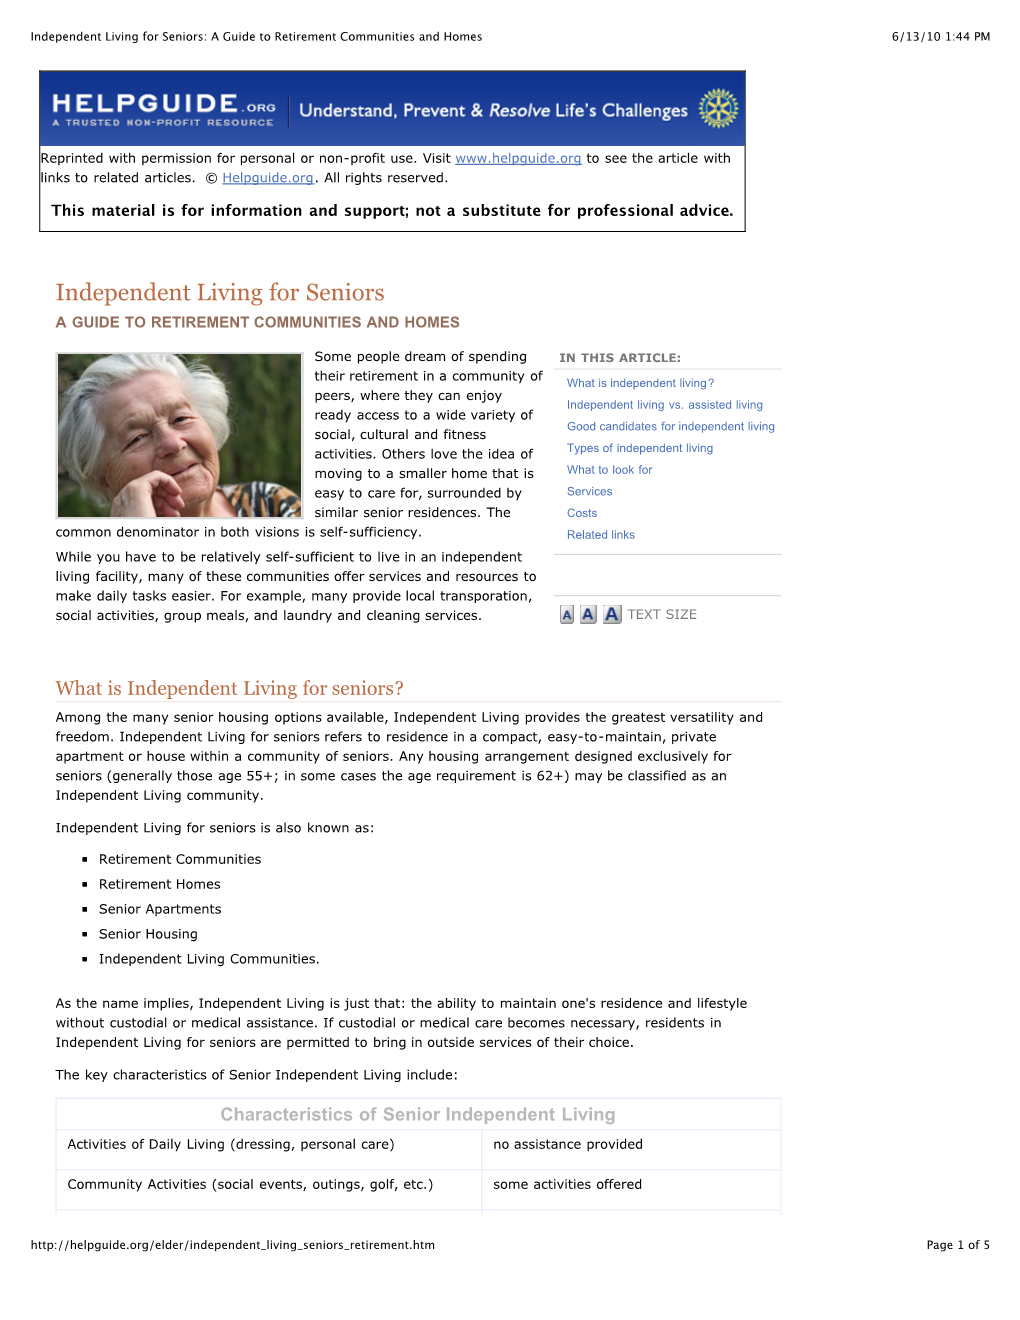 Independent Living for Seniors: a Guide to Retirement Communities and Homes 6/13/10 1:44 PM